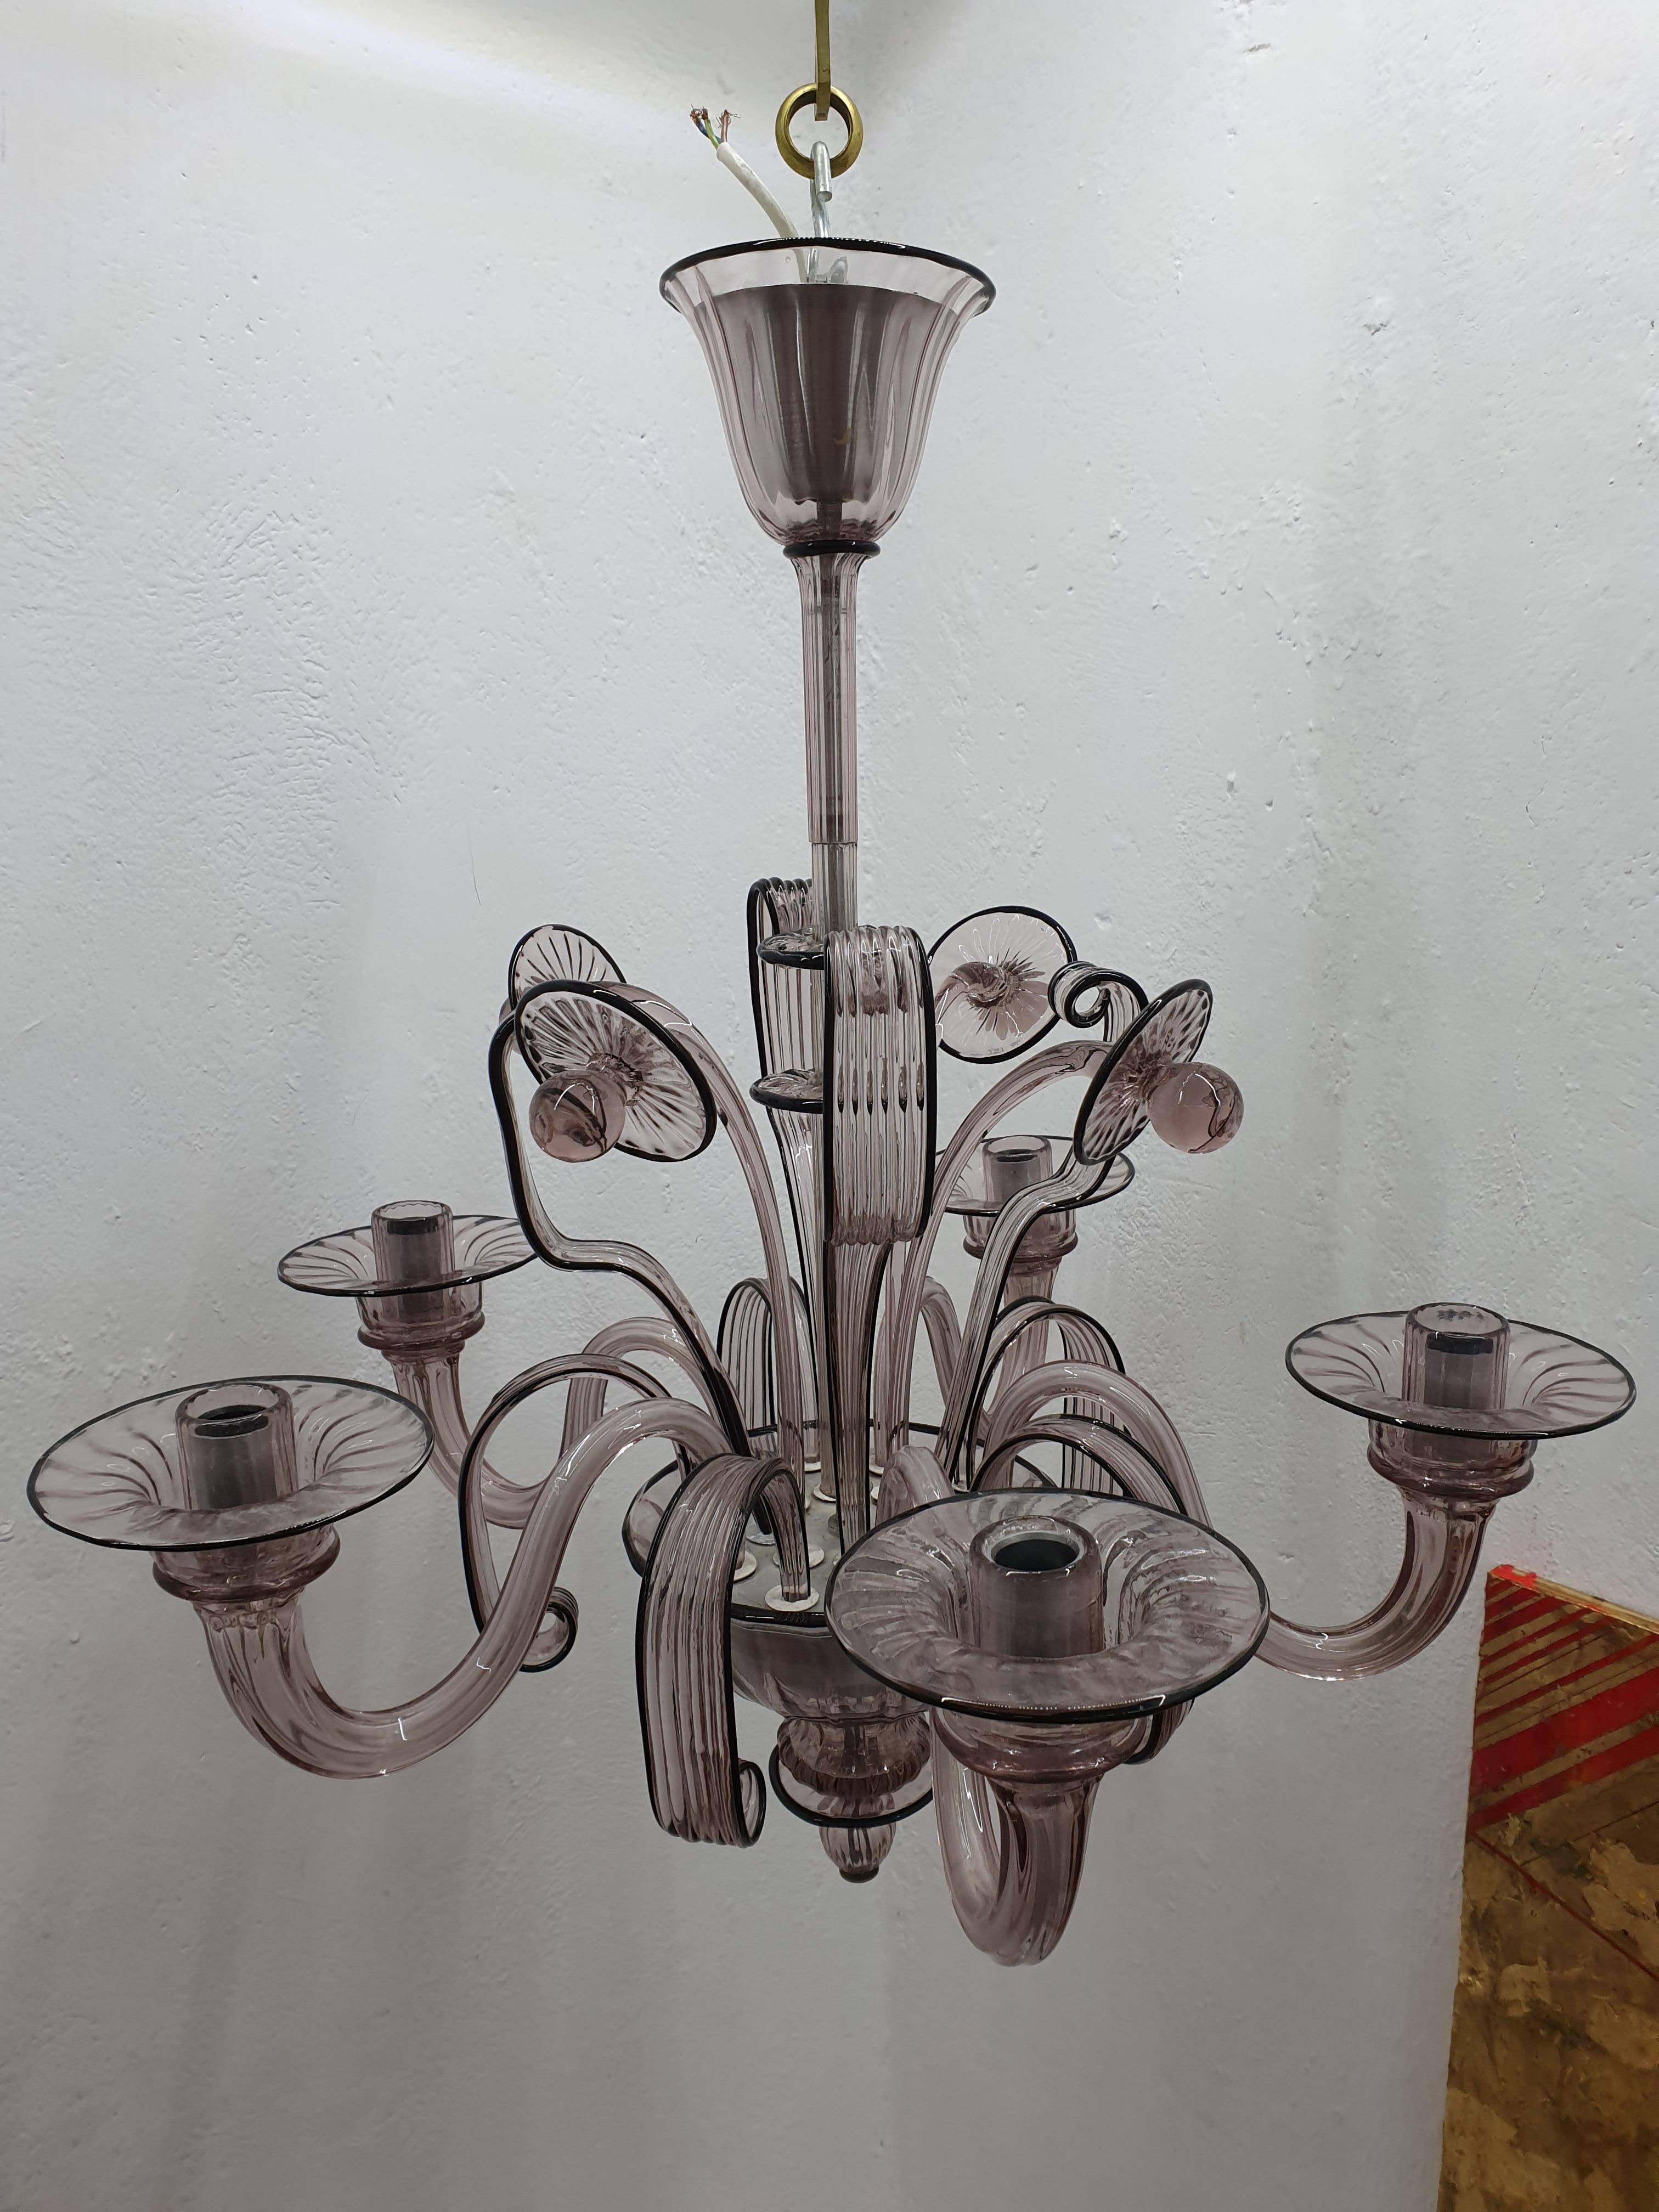 Art Deco Style Chandelier Attributed to Venini Murano Glass, Itlay, circa 1940 For Sale 2